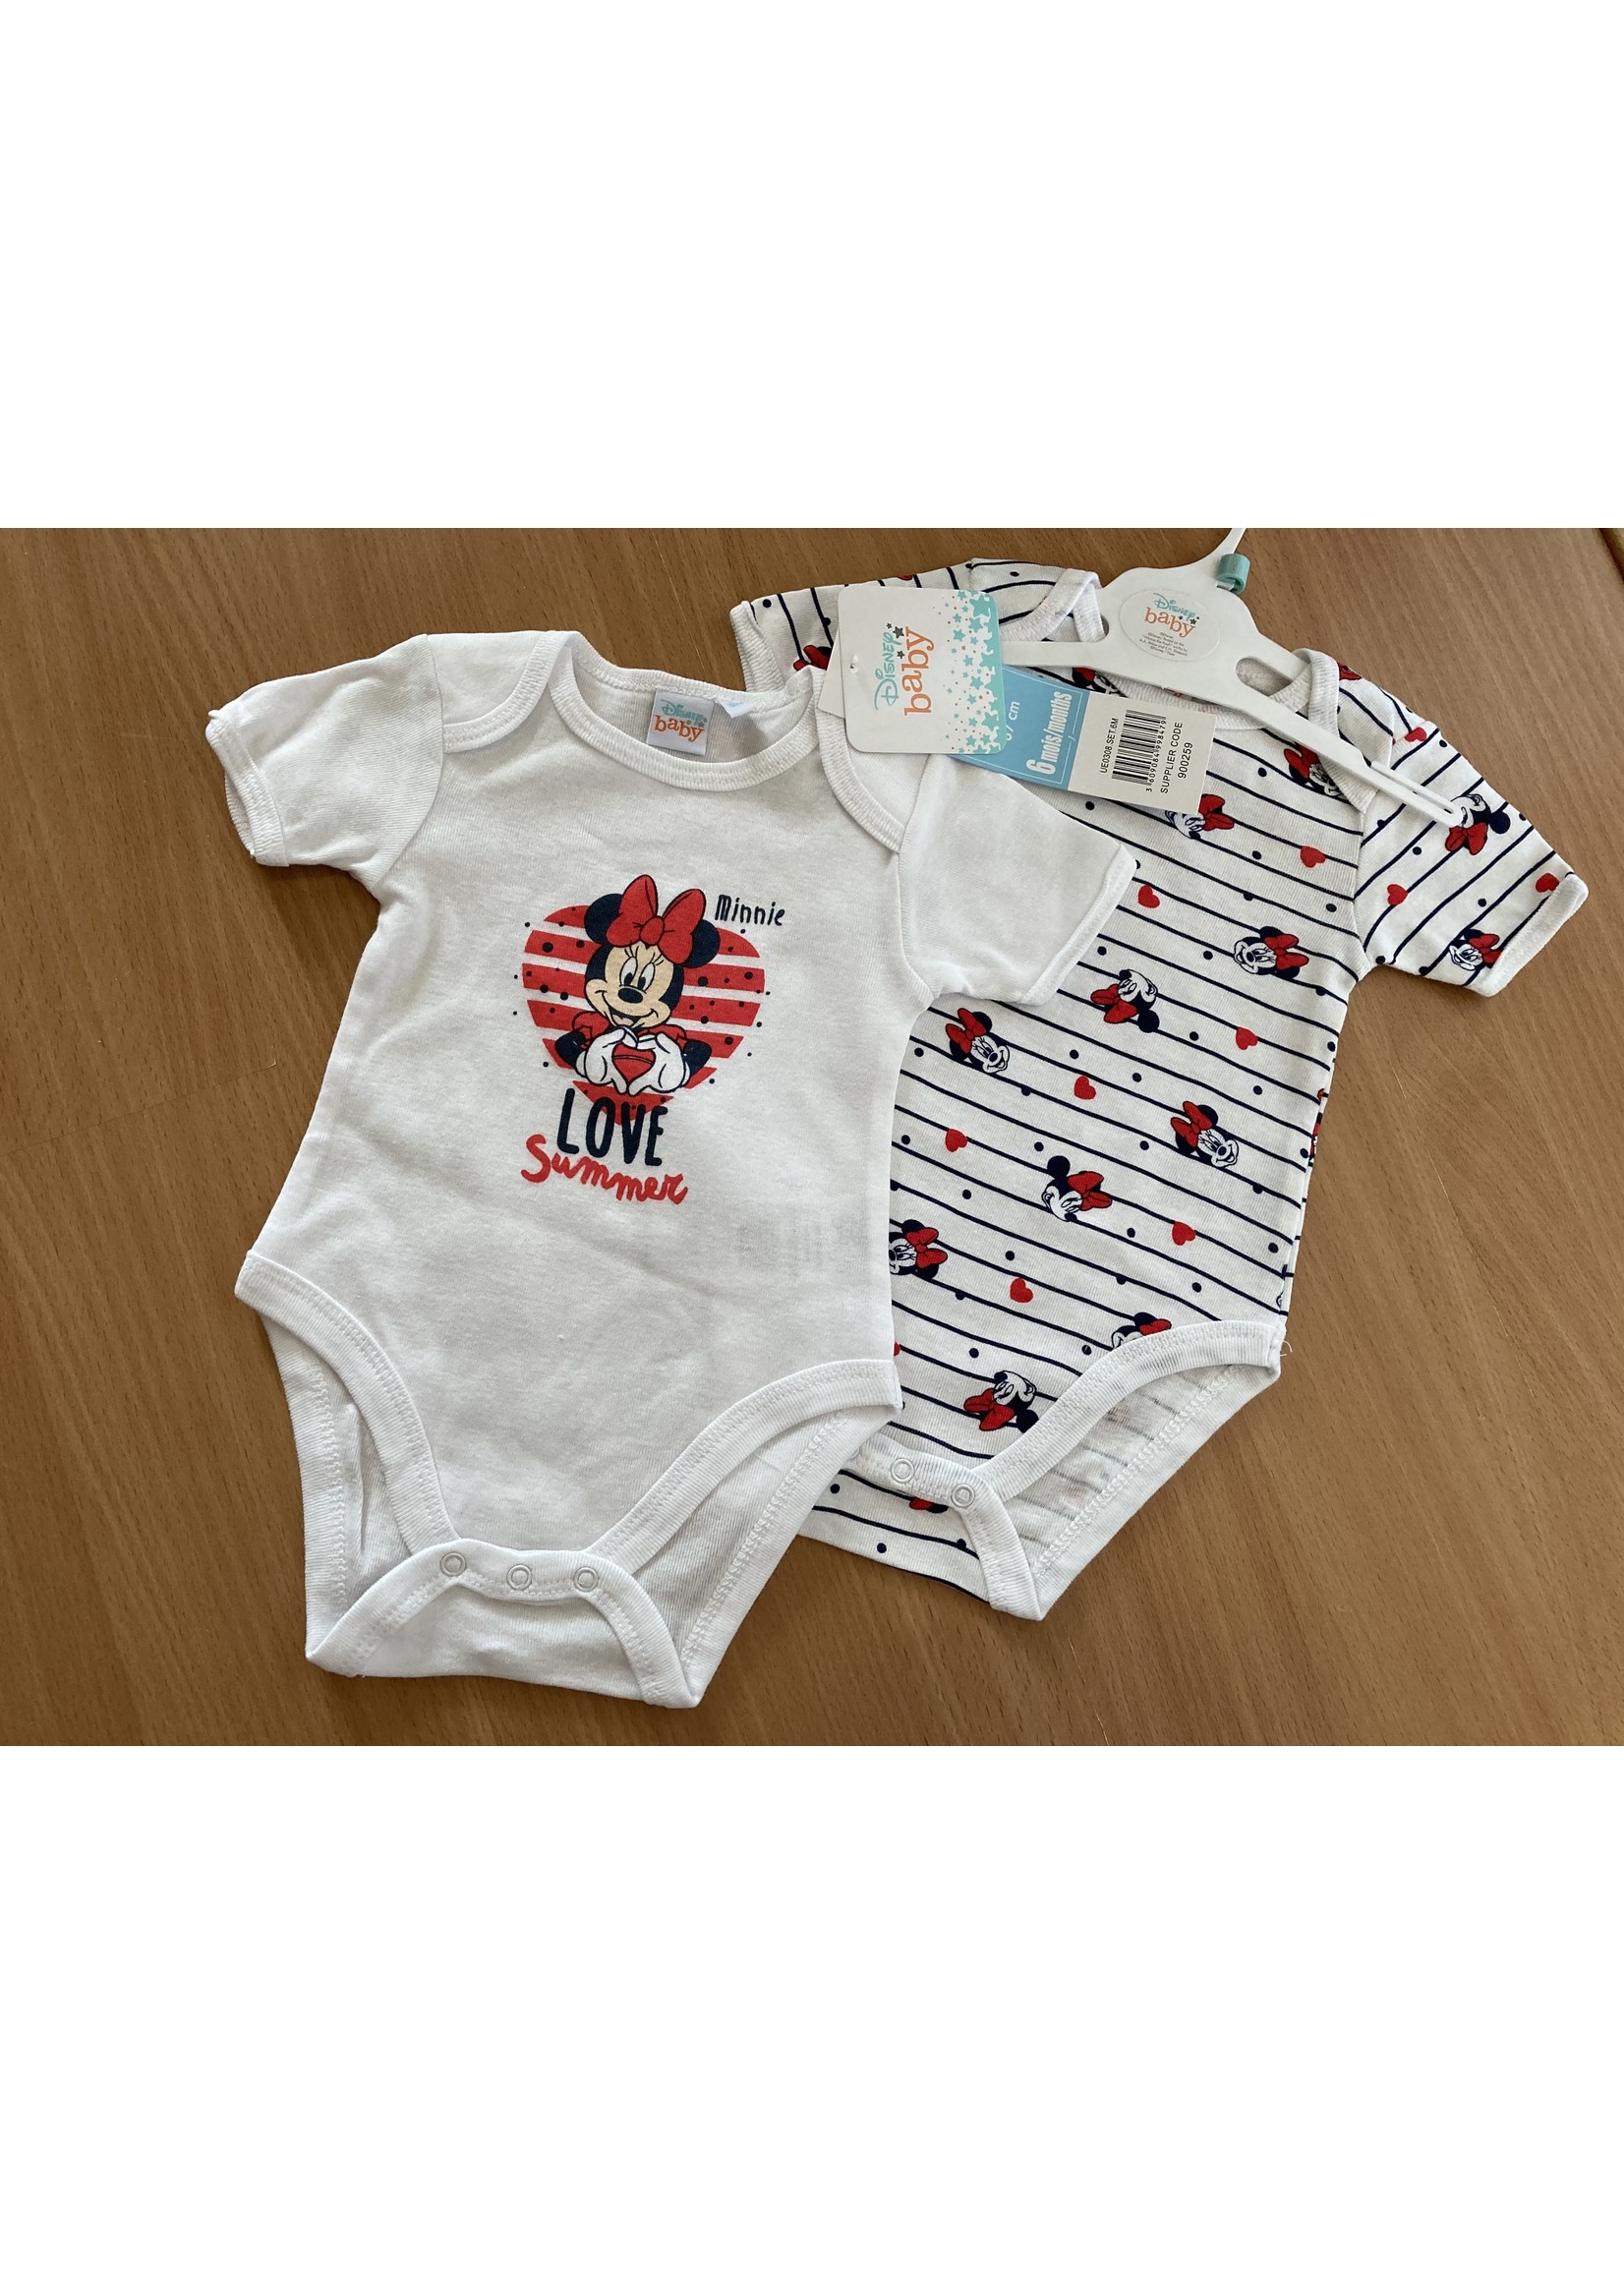 Disney baby Minnie Mouse rompers from Disney baby 2 pack